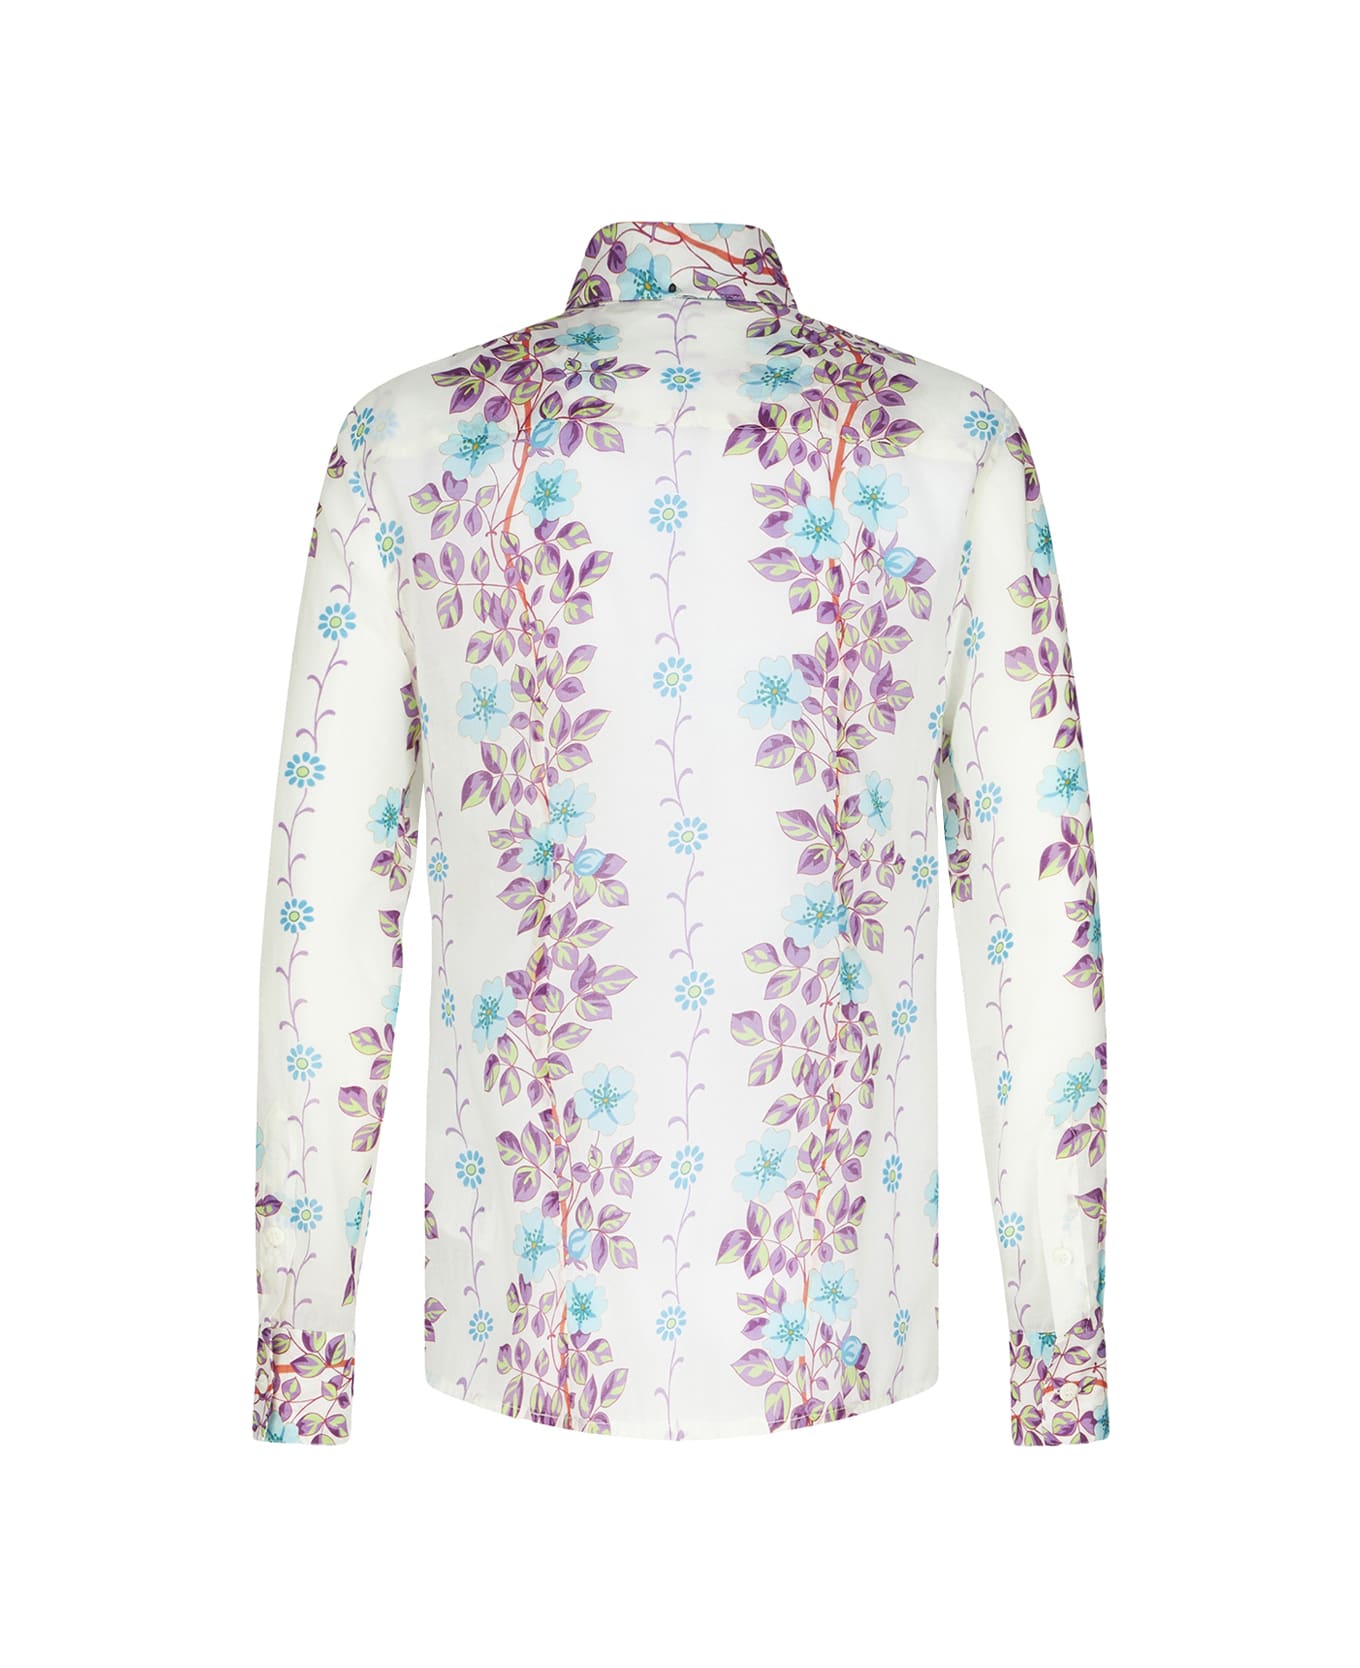 Etro White Shirt With Placed Floral Print - White